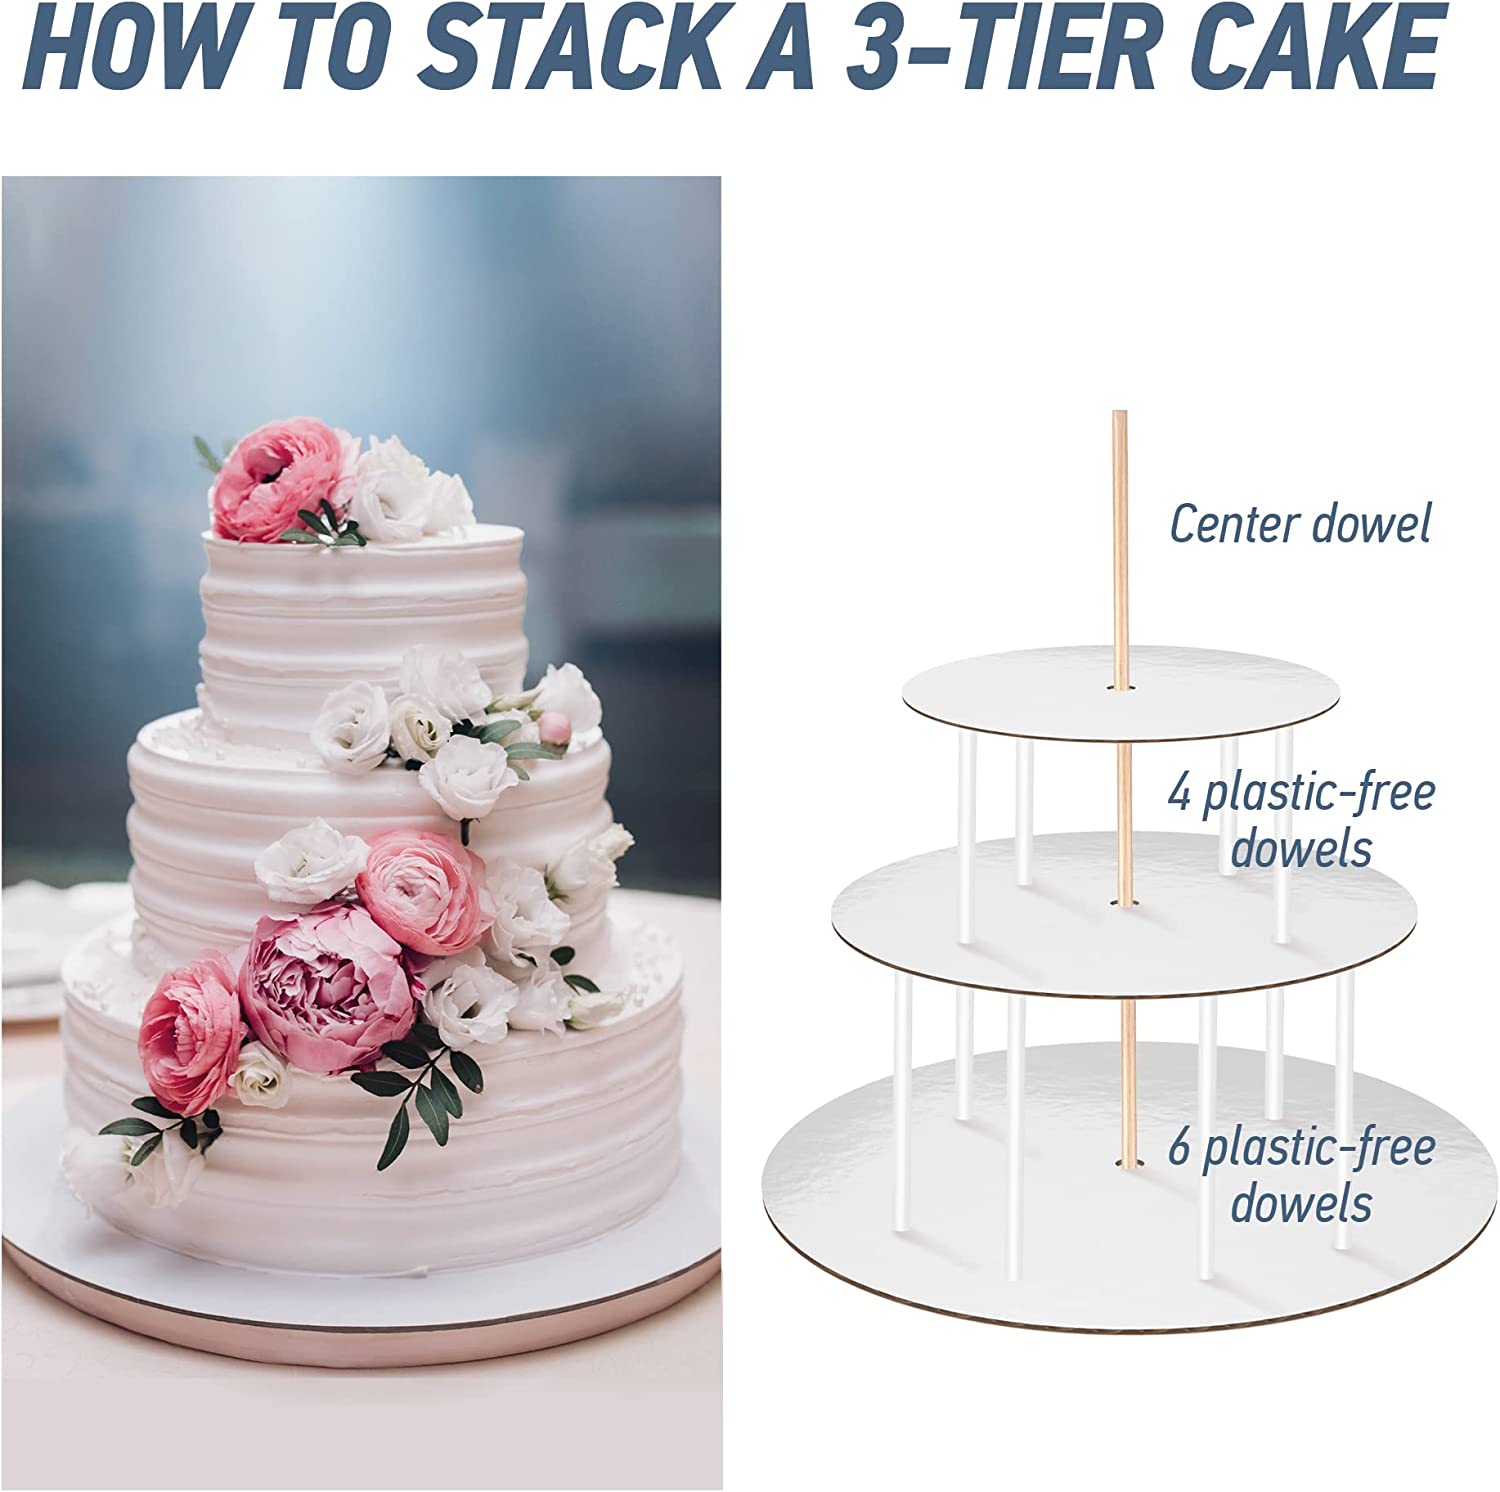 How to Make a Tiered Wedding Cake | Our Baking Blog: Cake, Cookie & Dessert  Recipes by Wilton